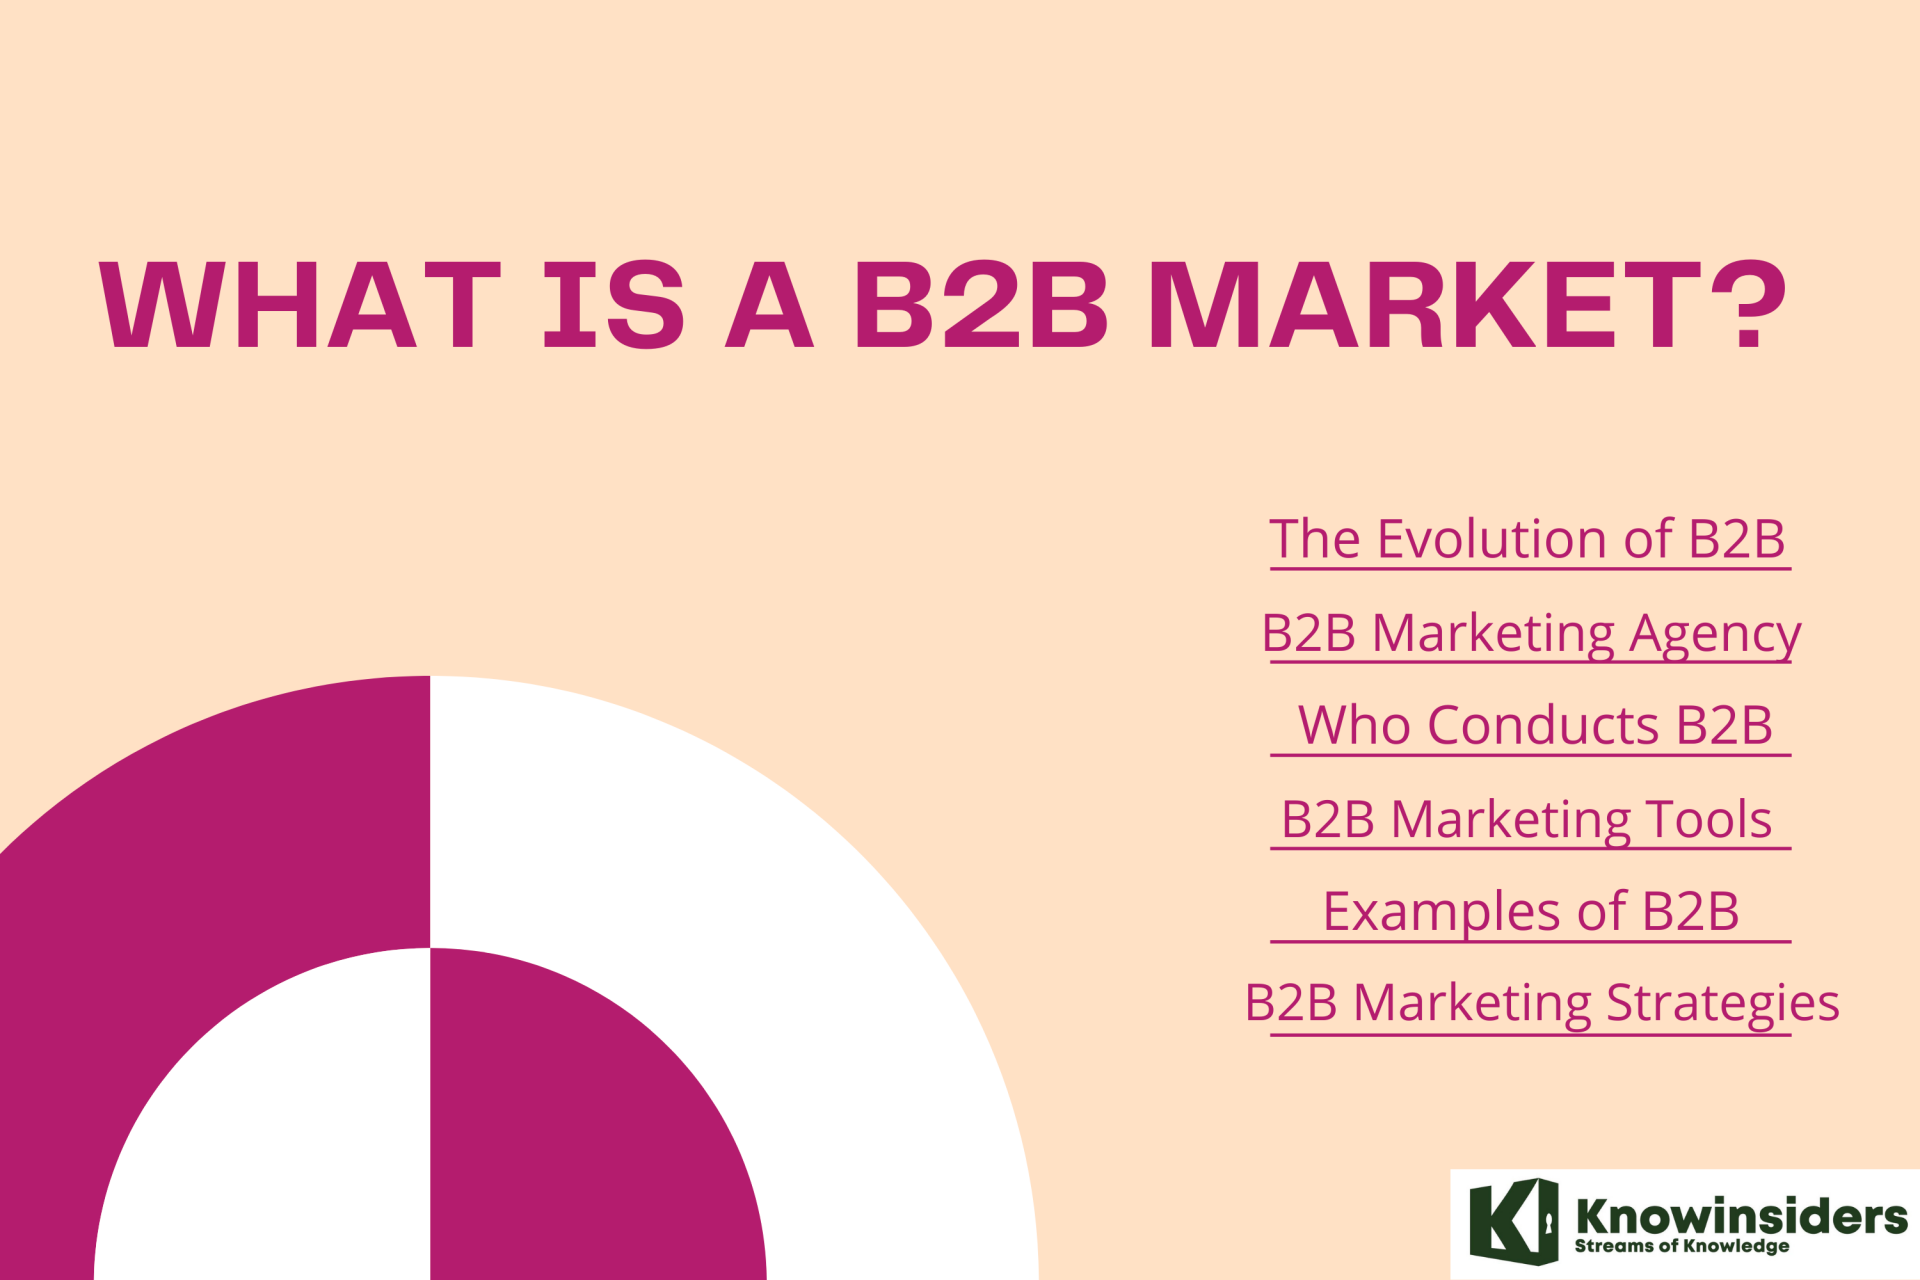 What Is A B2B Market and How Is B2B Marketing Important?